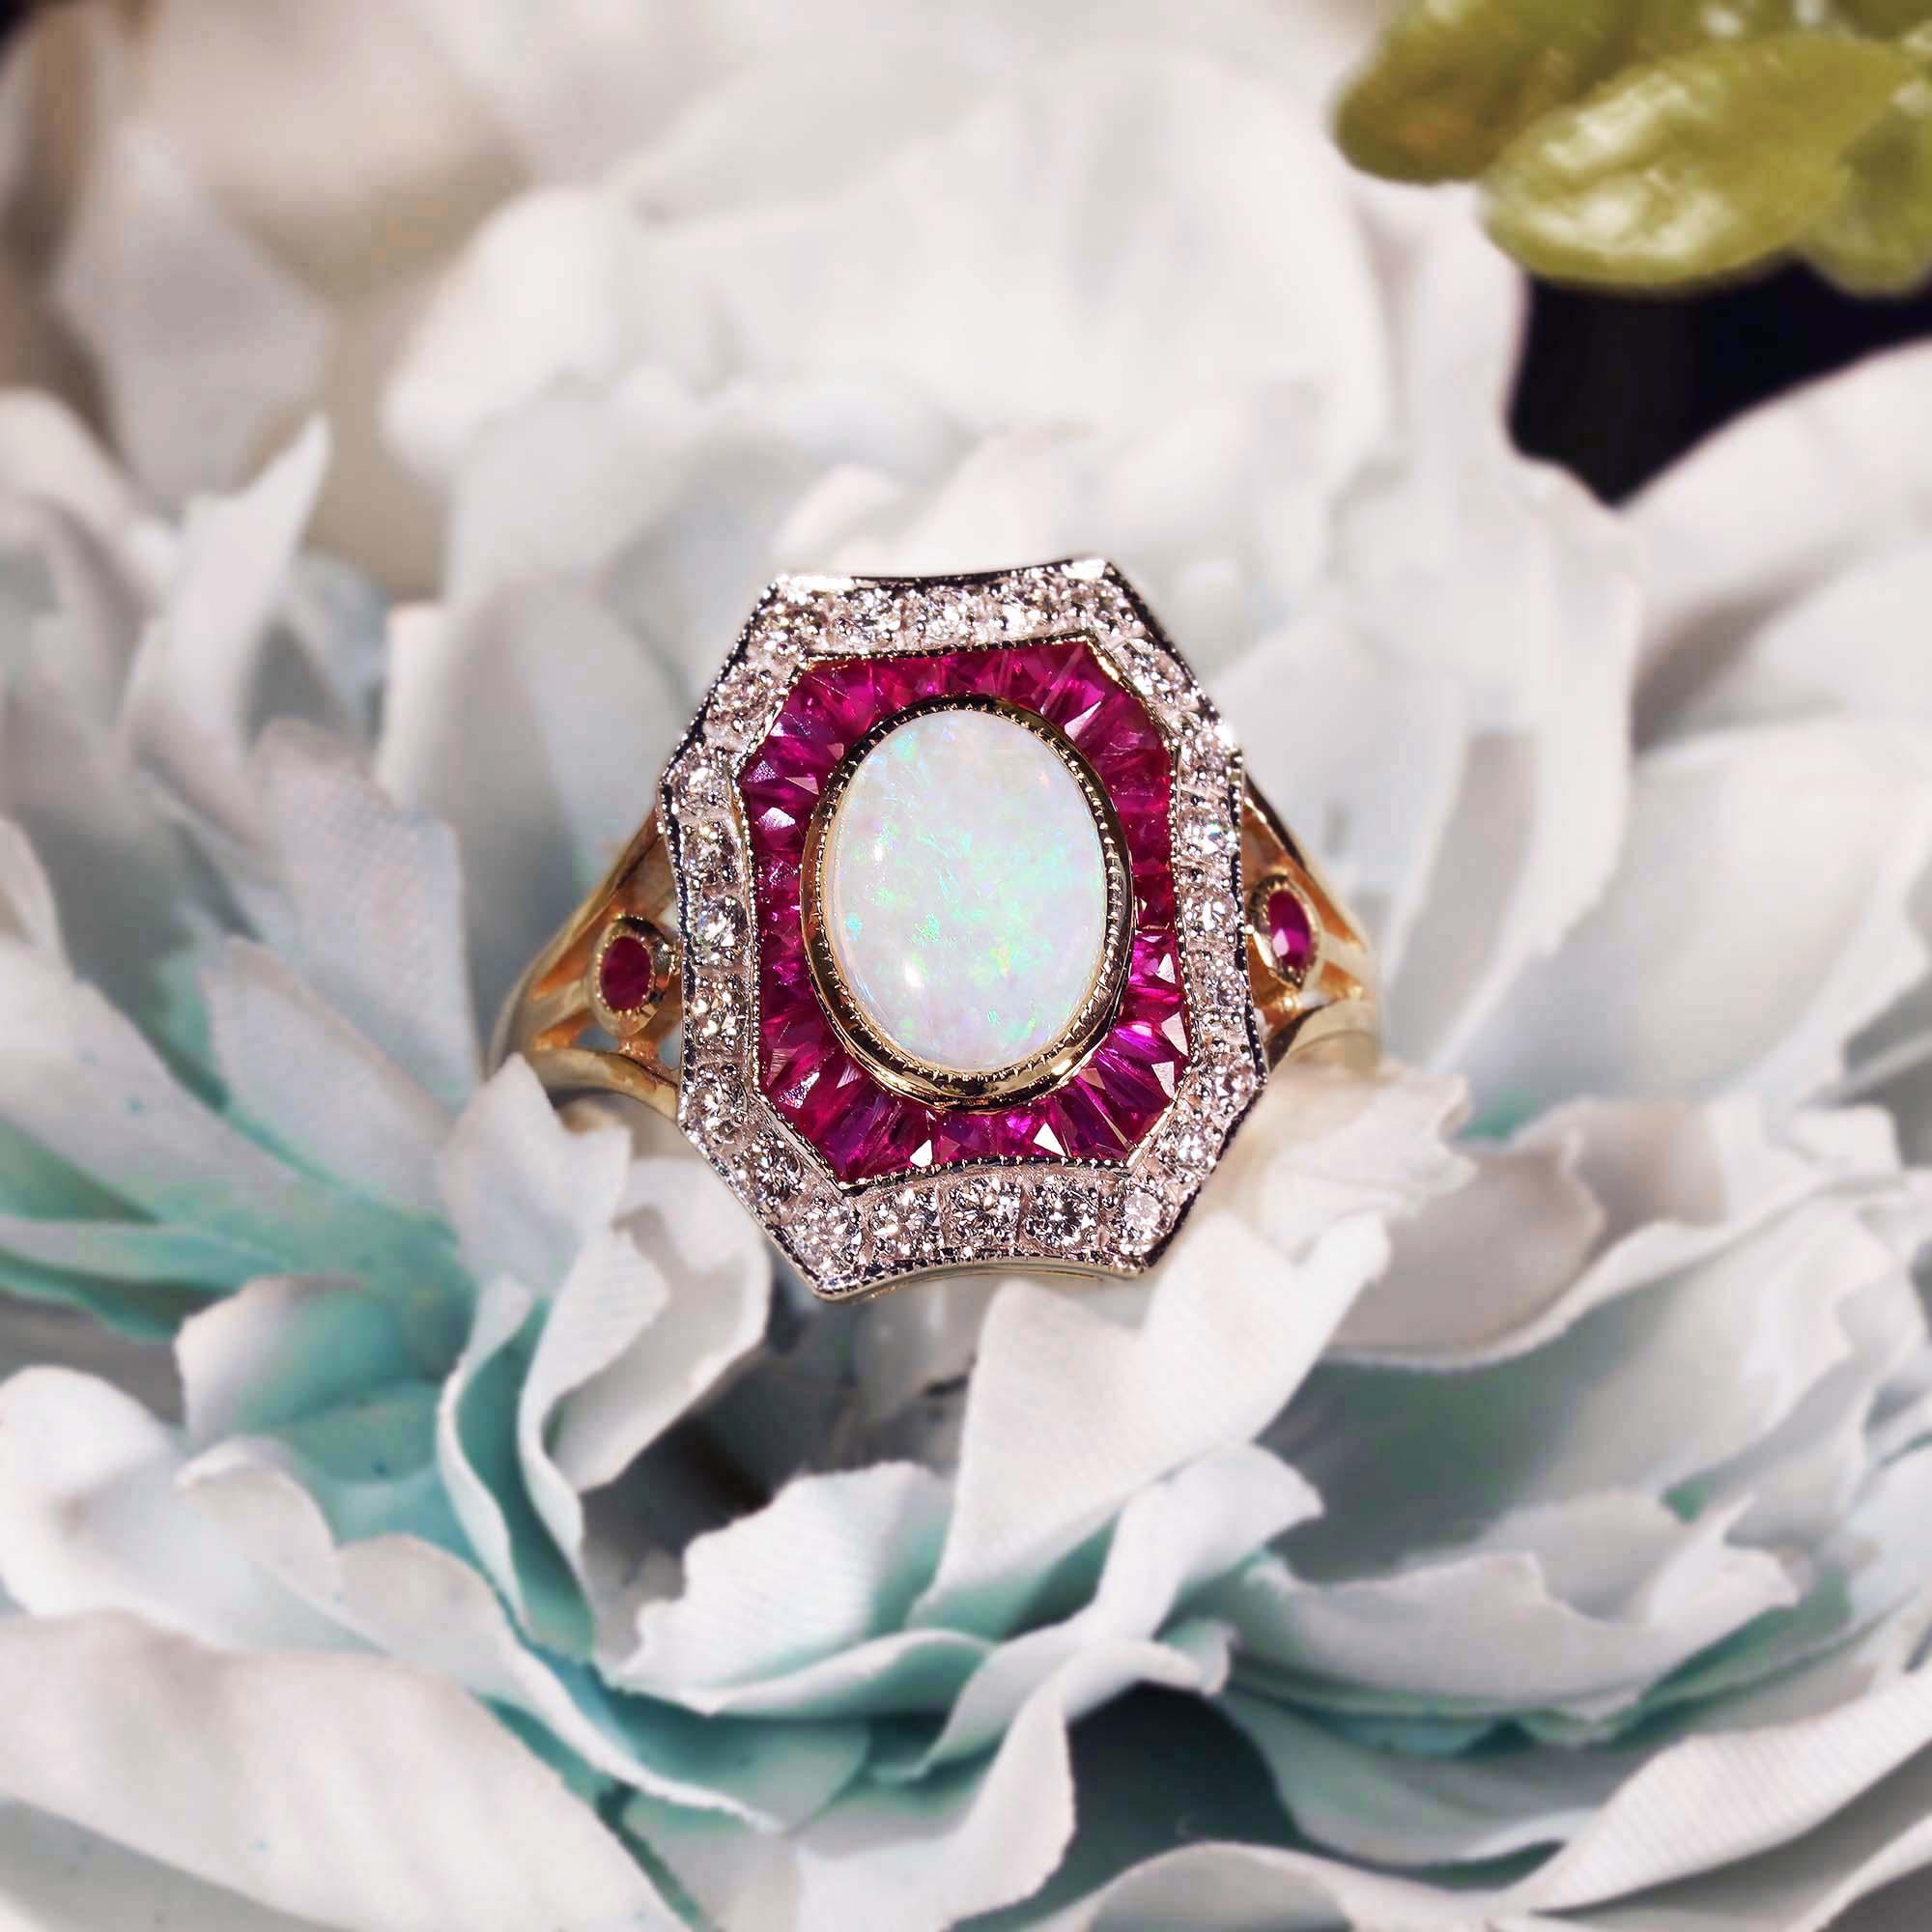 Add an elegant touch to your look with this genuine oval opal, ruby, and diamond ring. Crafted in 14K yellow gold Art Deco style setting, this beautiful ring features an oval cut opal accented in a halo of French cut ruby and round diamond. The